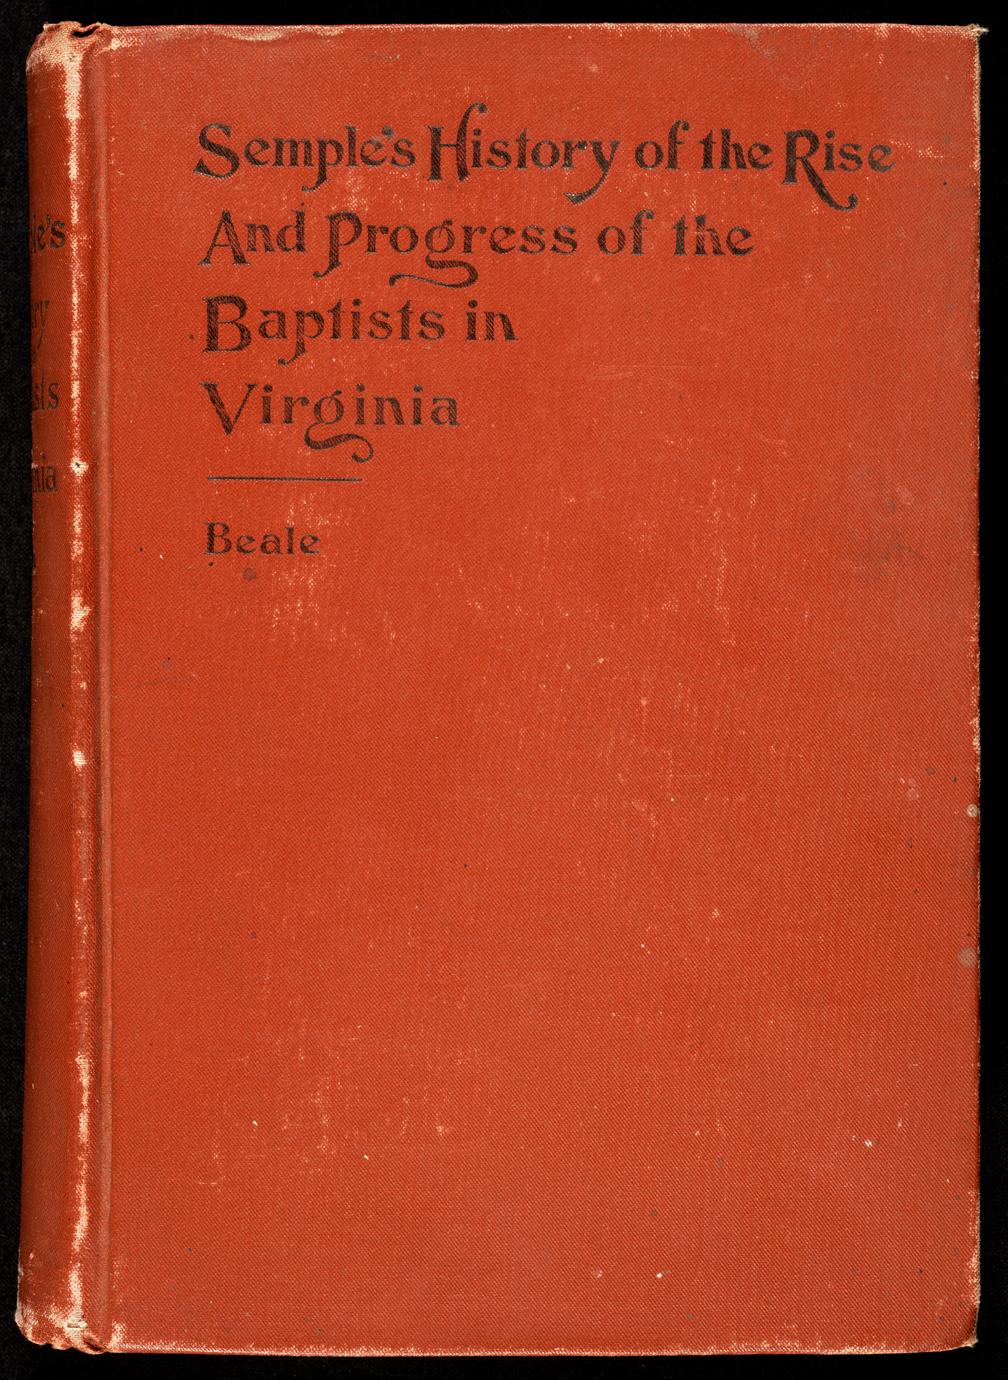 A history of the rise and progress of the Baptists in Virginia (1 of 3)